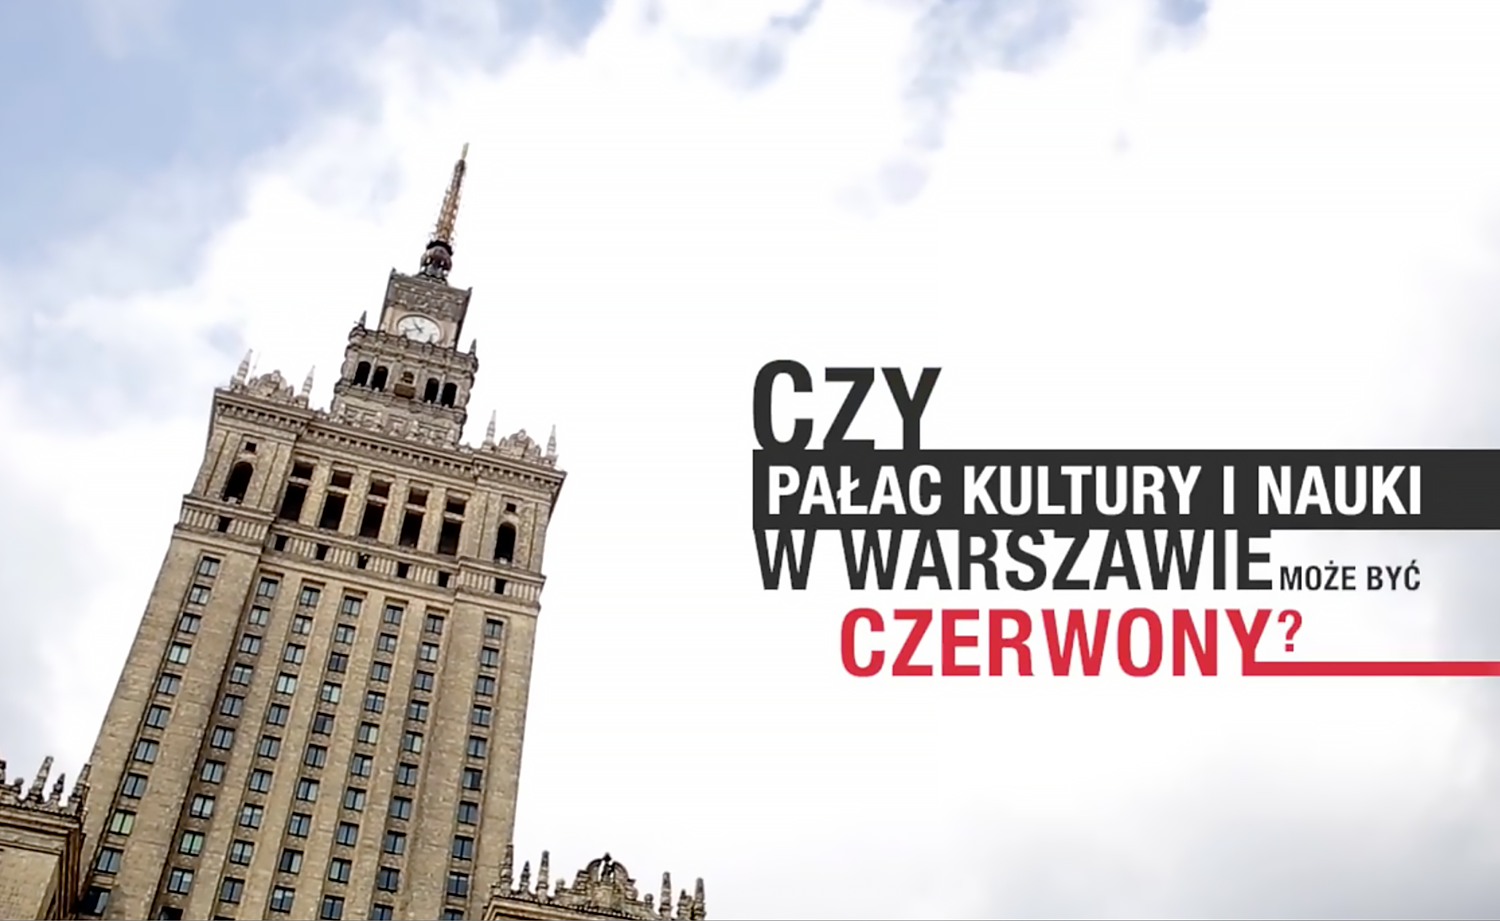 Dekoral will change the colour of the Palace of Culture and Science in Warsaw? The campaign promoting Visualiser 2.0 dekoral application